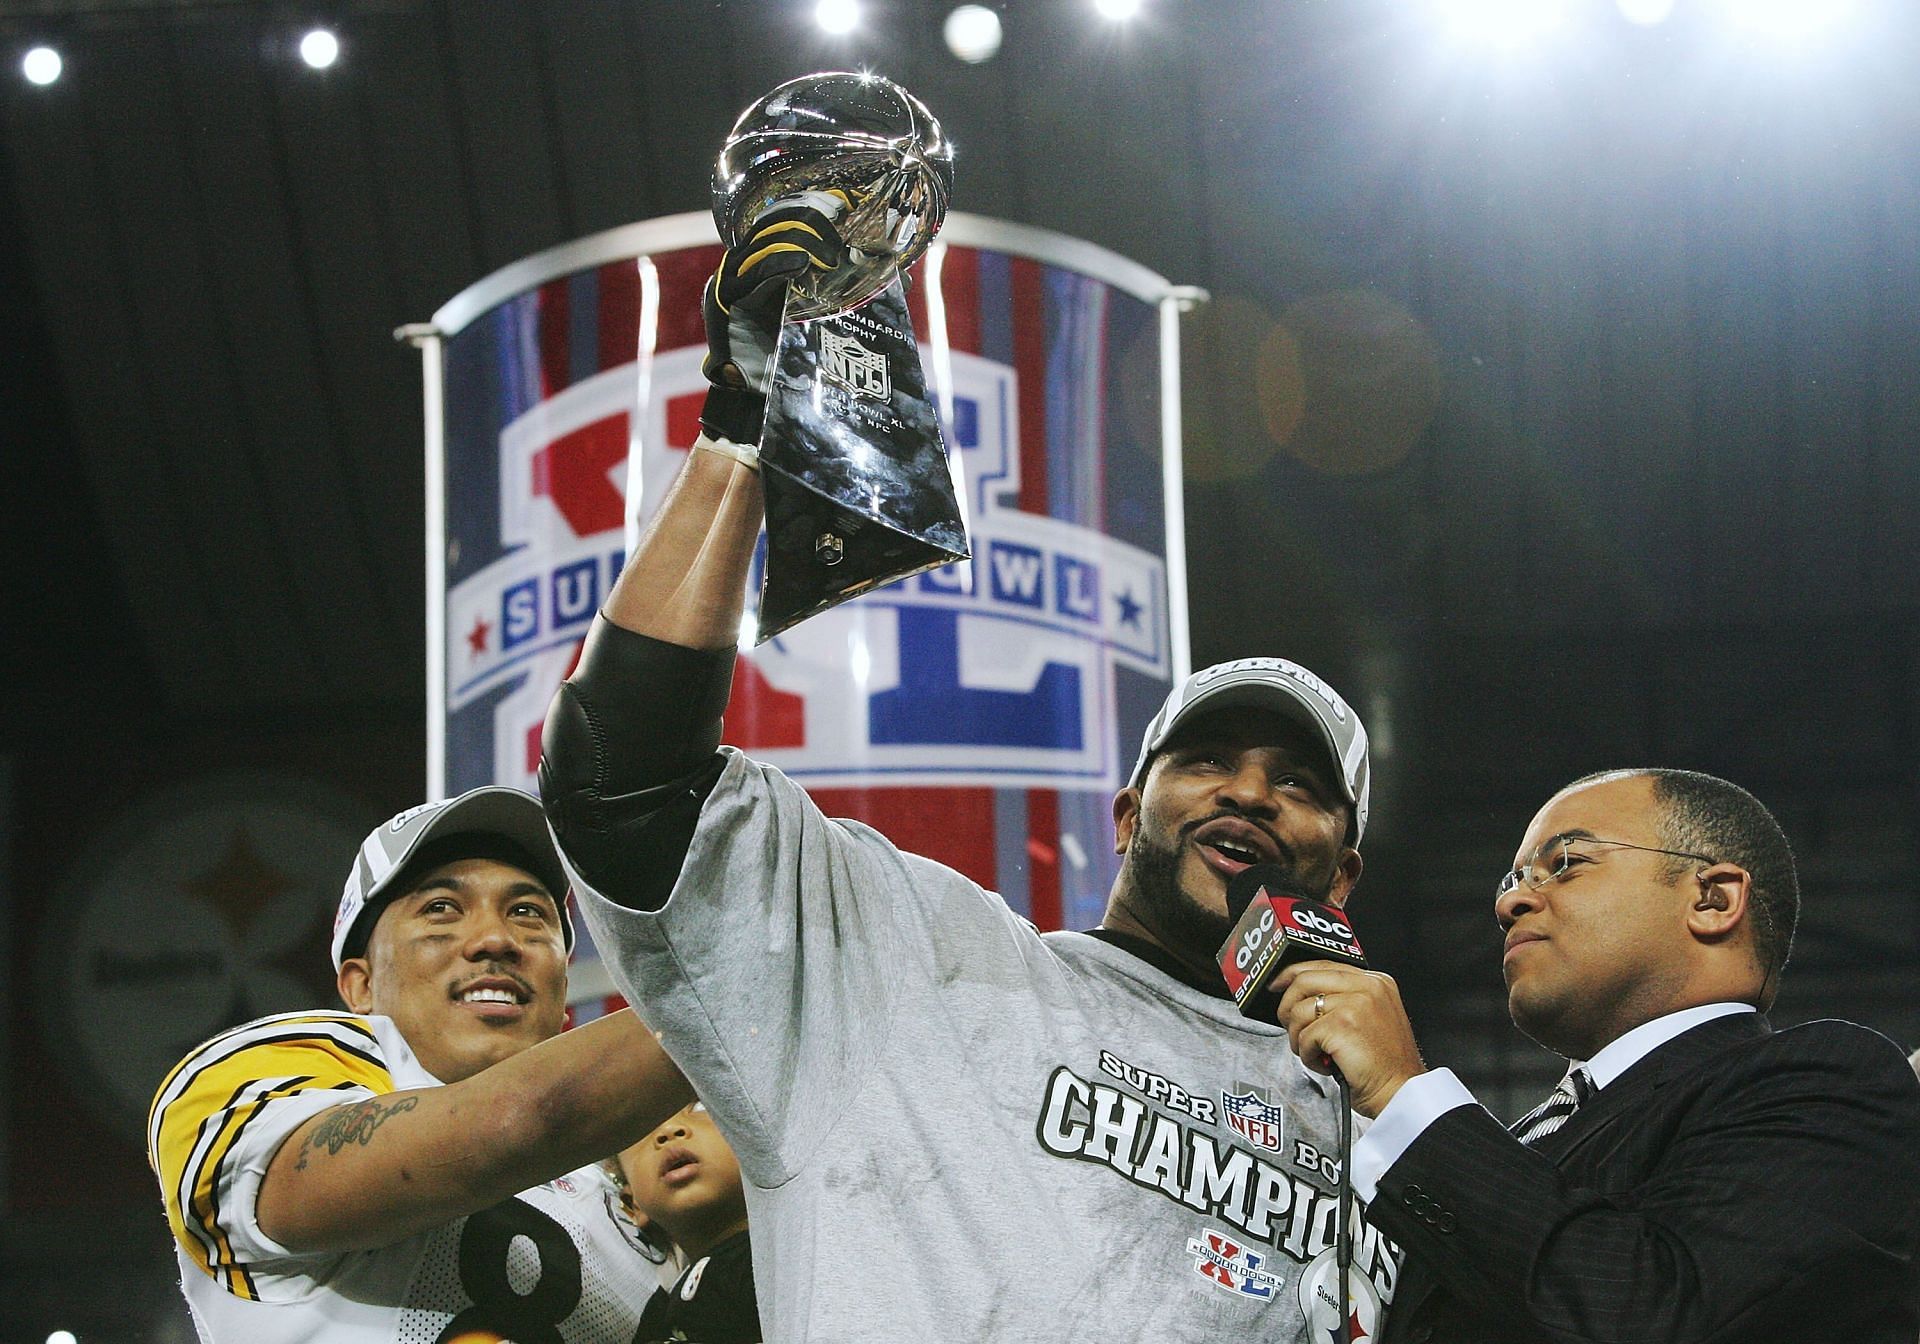 Jerome Bettis lifting the Vince Lombardi trophy with Hines Ward